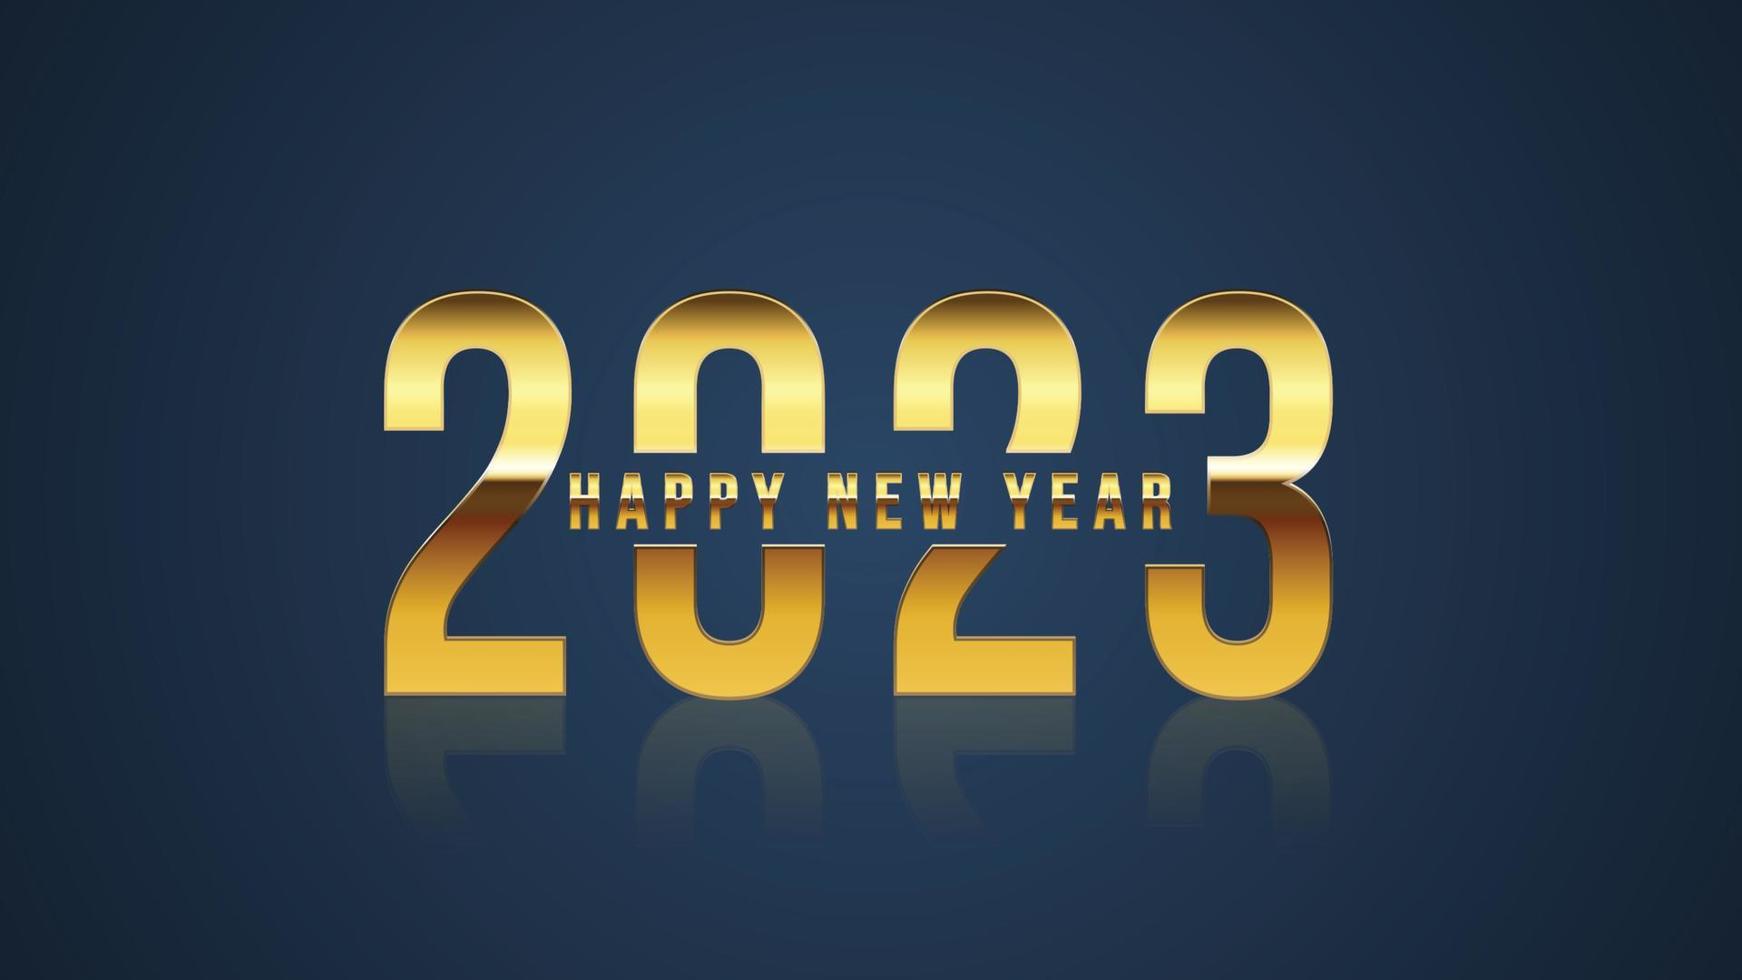 2023 Happy New Year elegant design - vector illustration of golden 2023 logo numbers - perfect typography for 2023 save the date luxury designs and new year celebration.